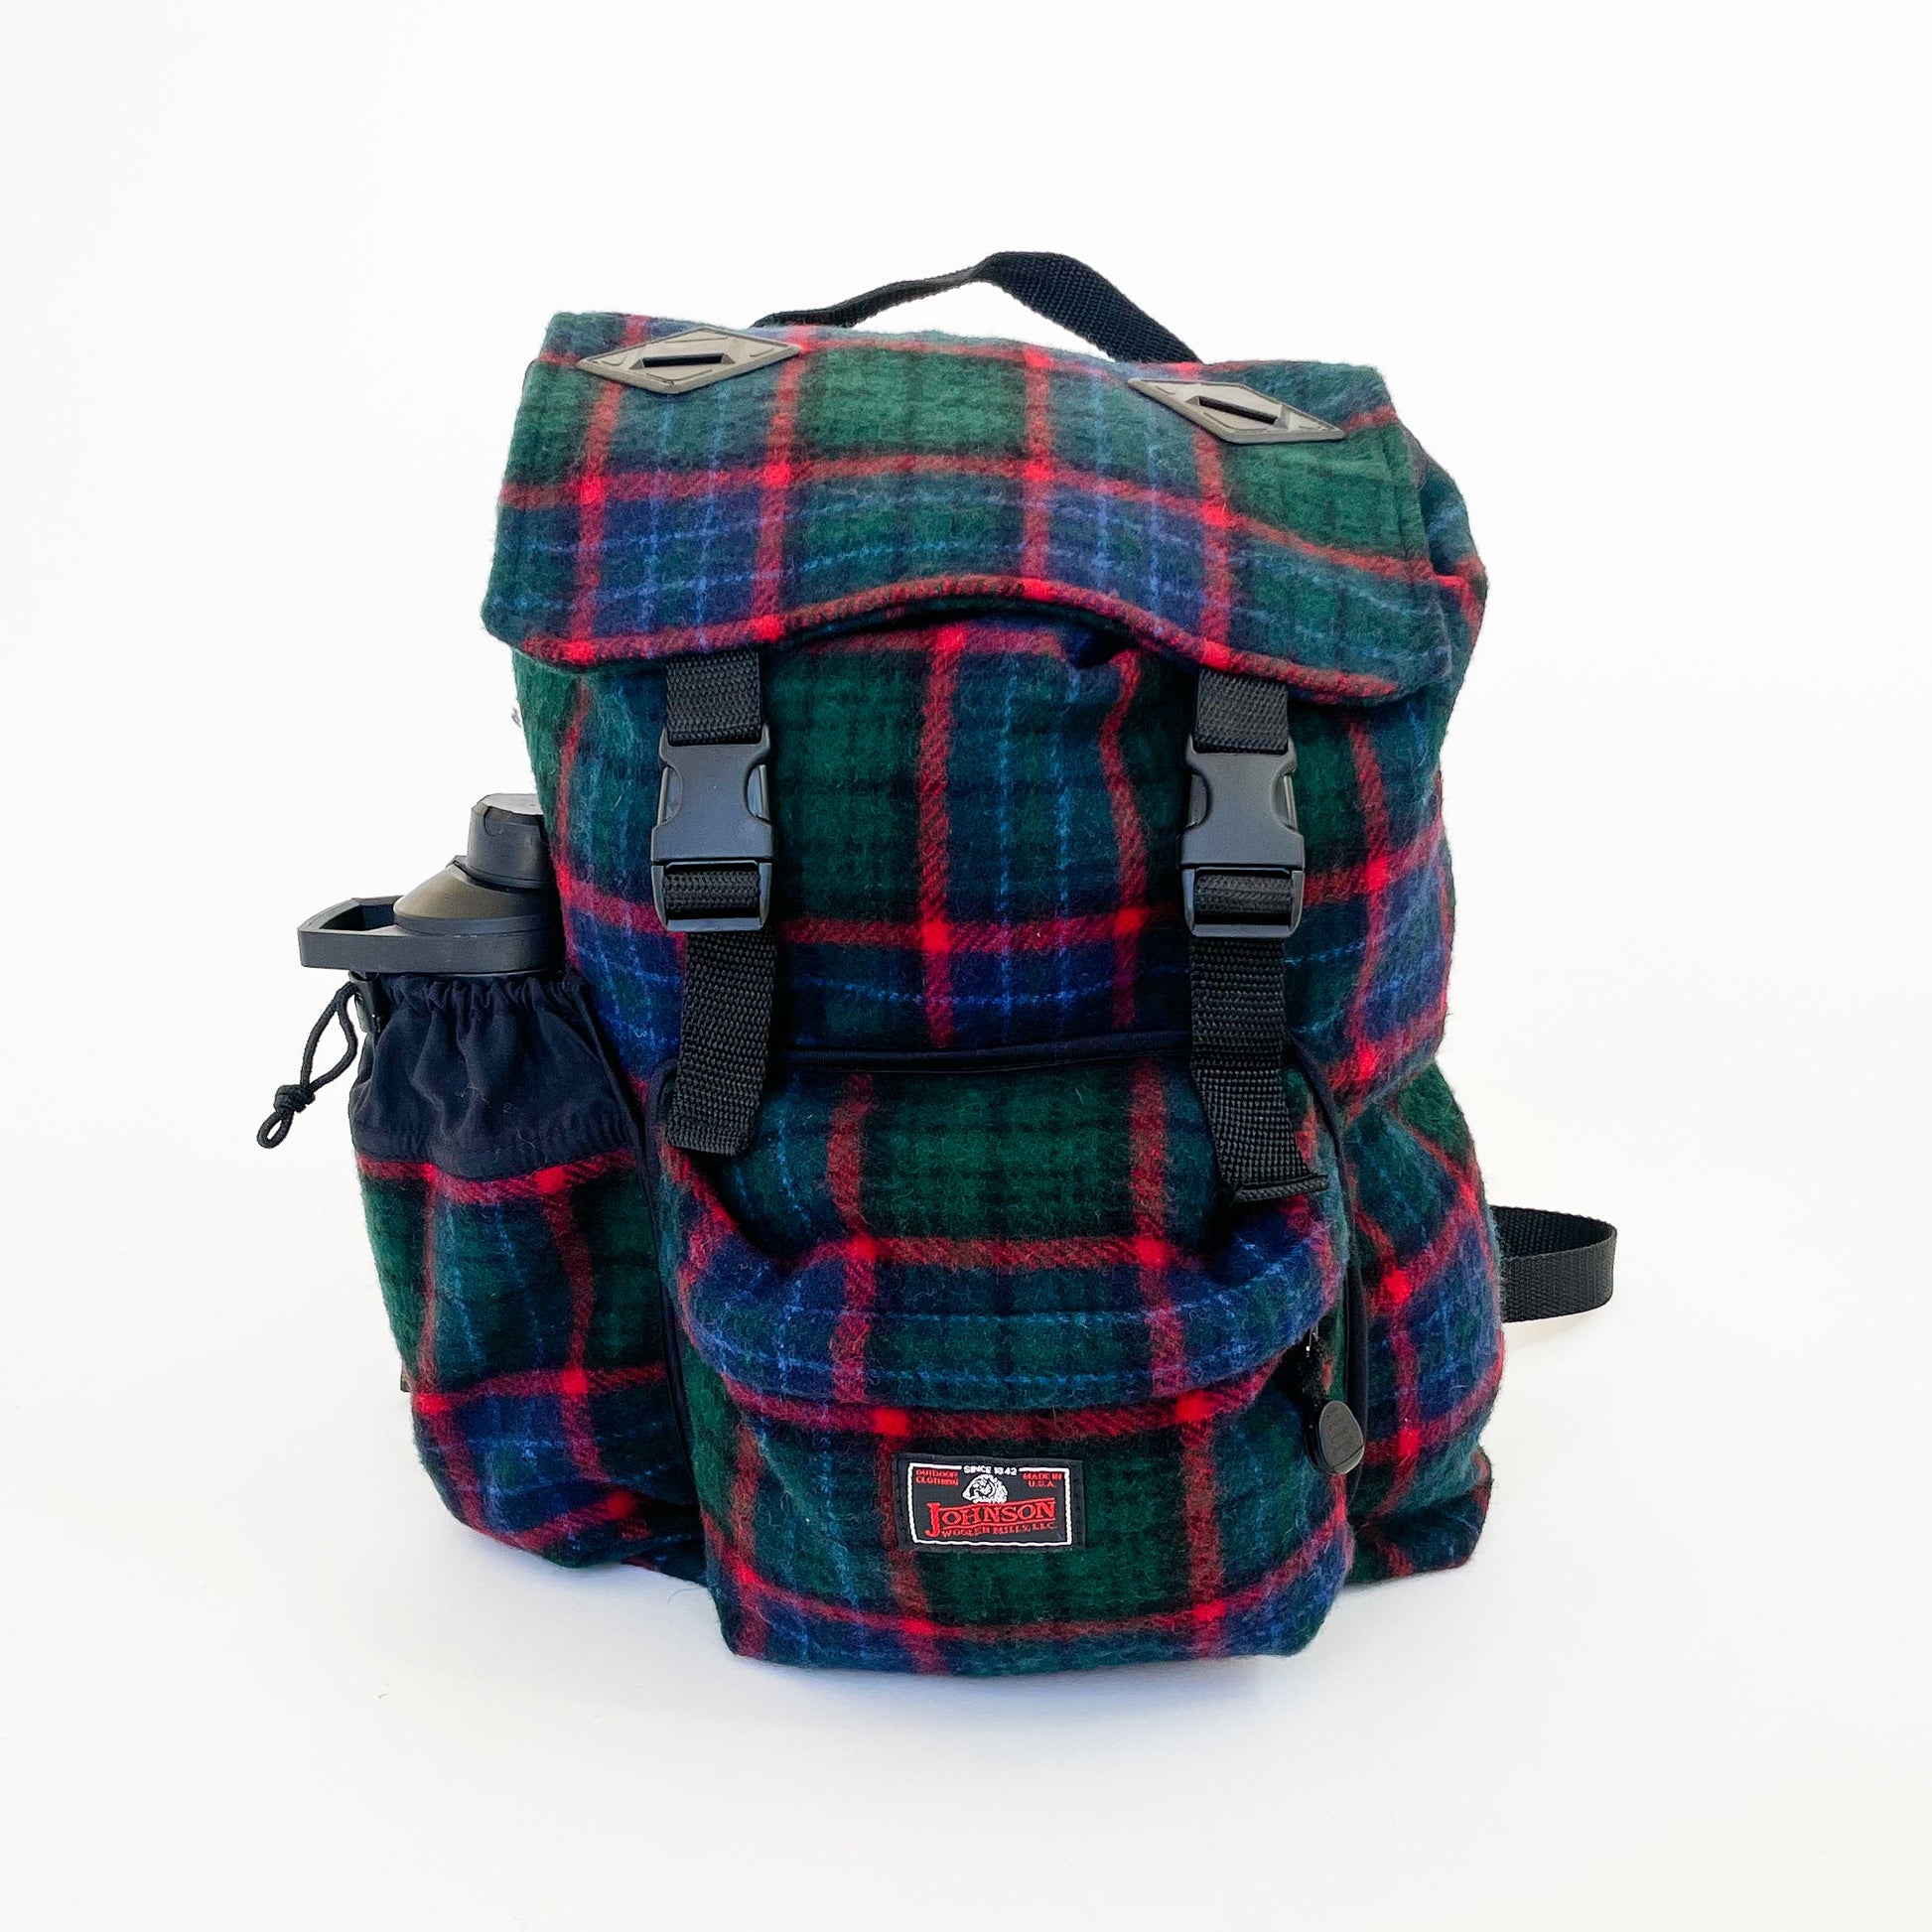 Wool back pack green and blue with red windowpane print, shown with water bottle in side pocket